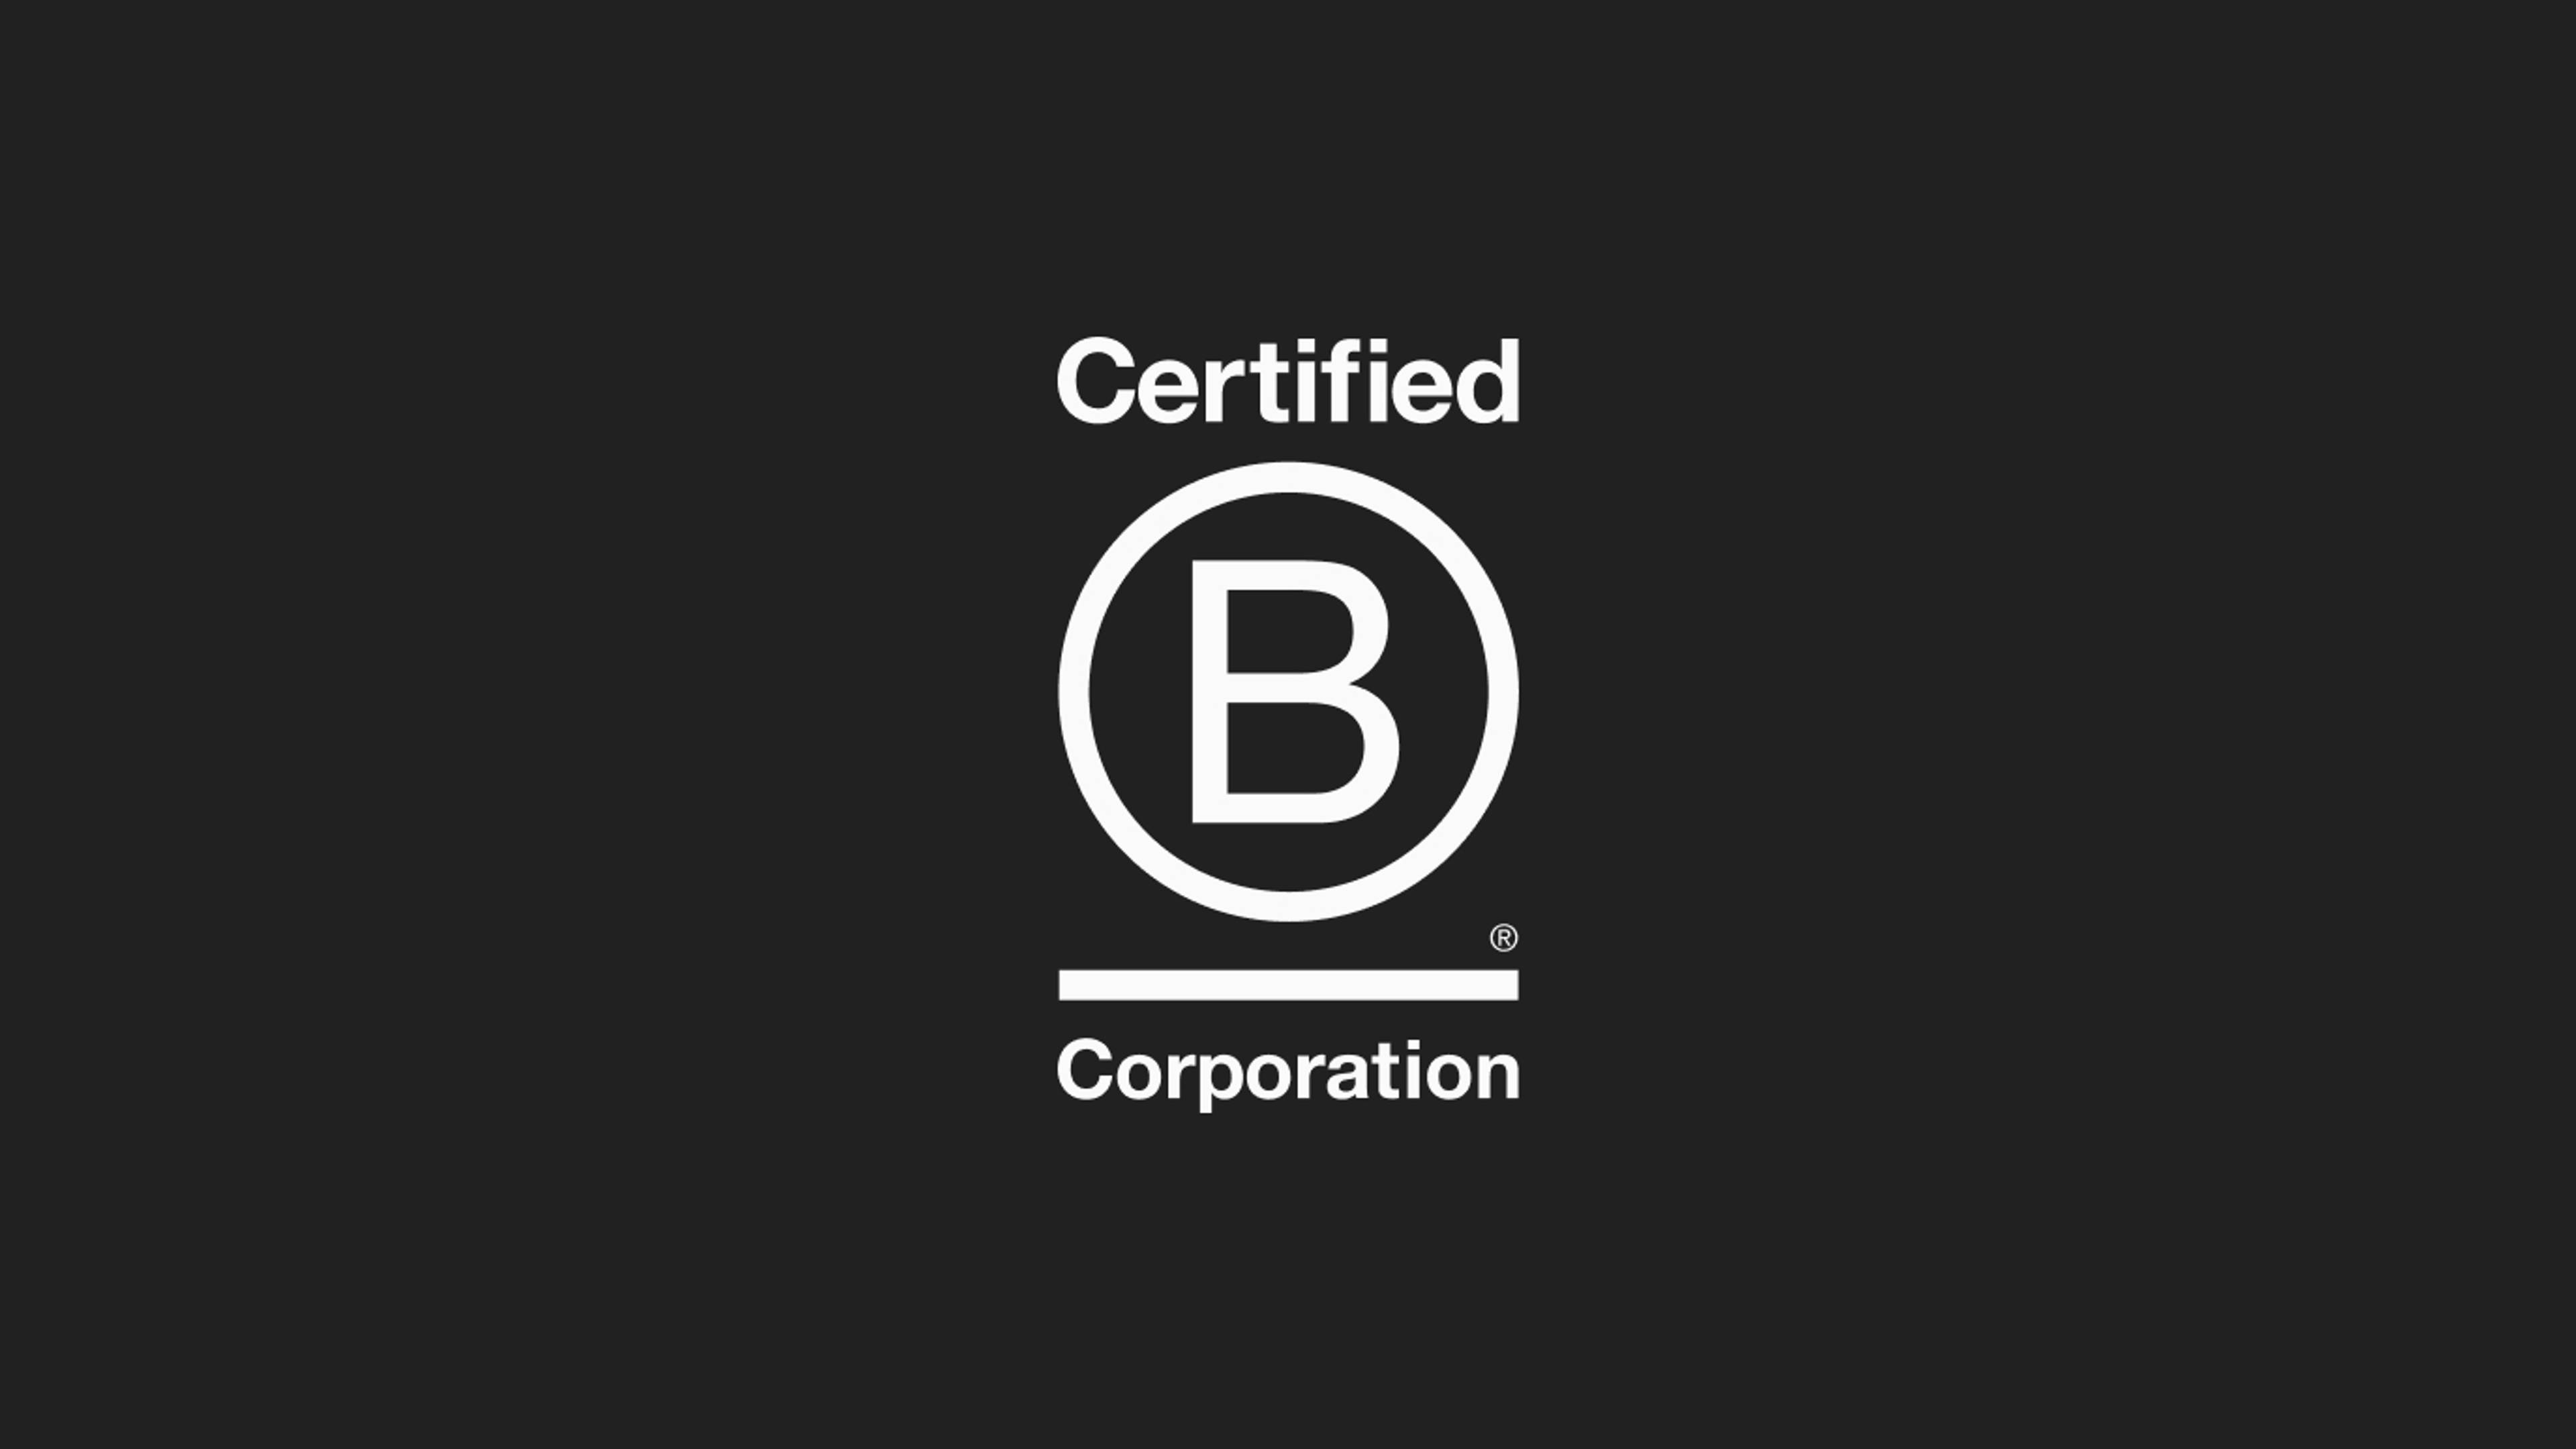 Bcorp image